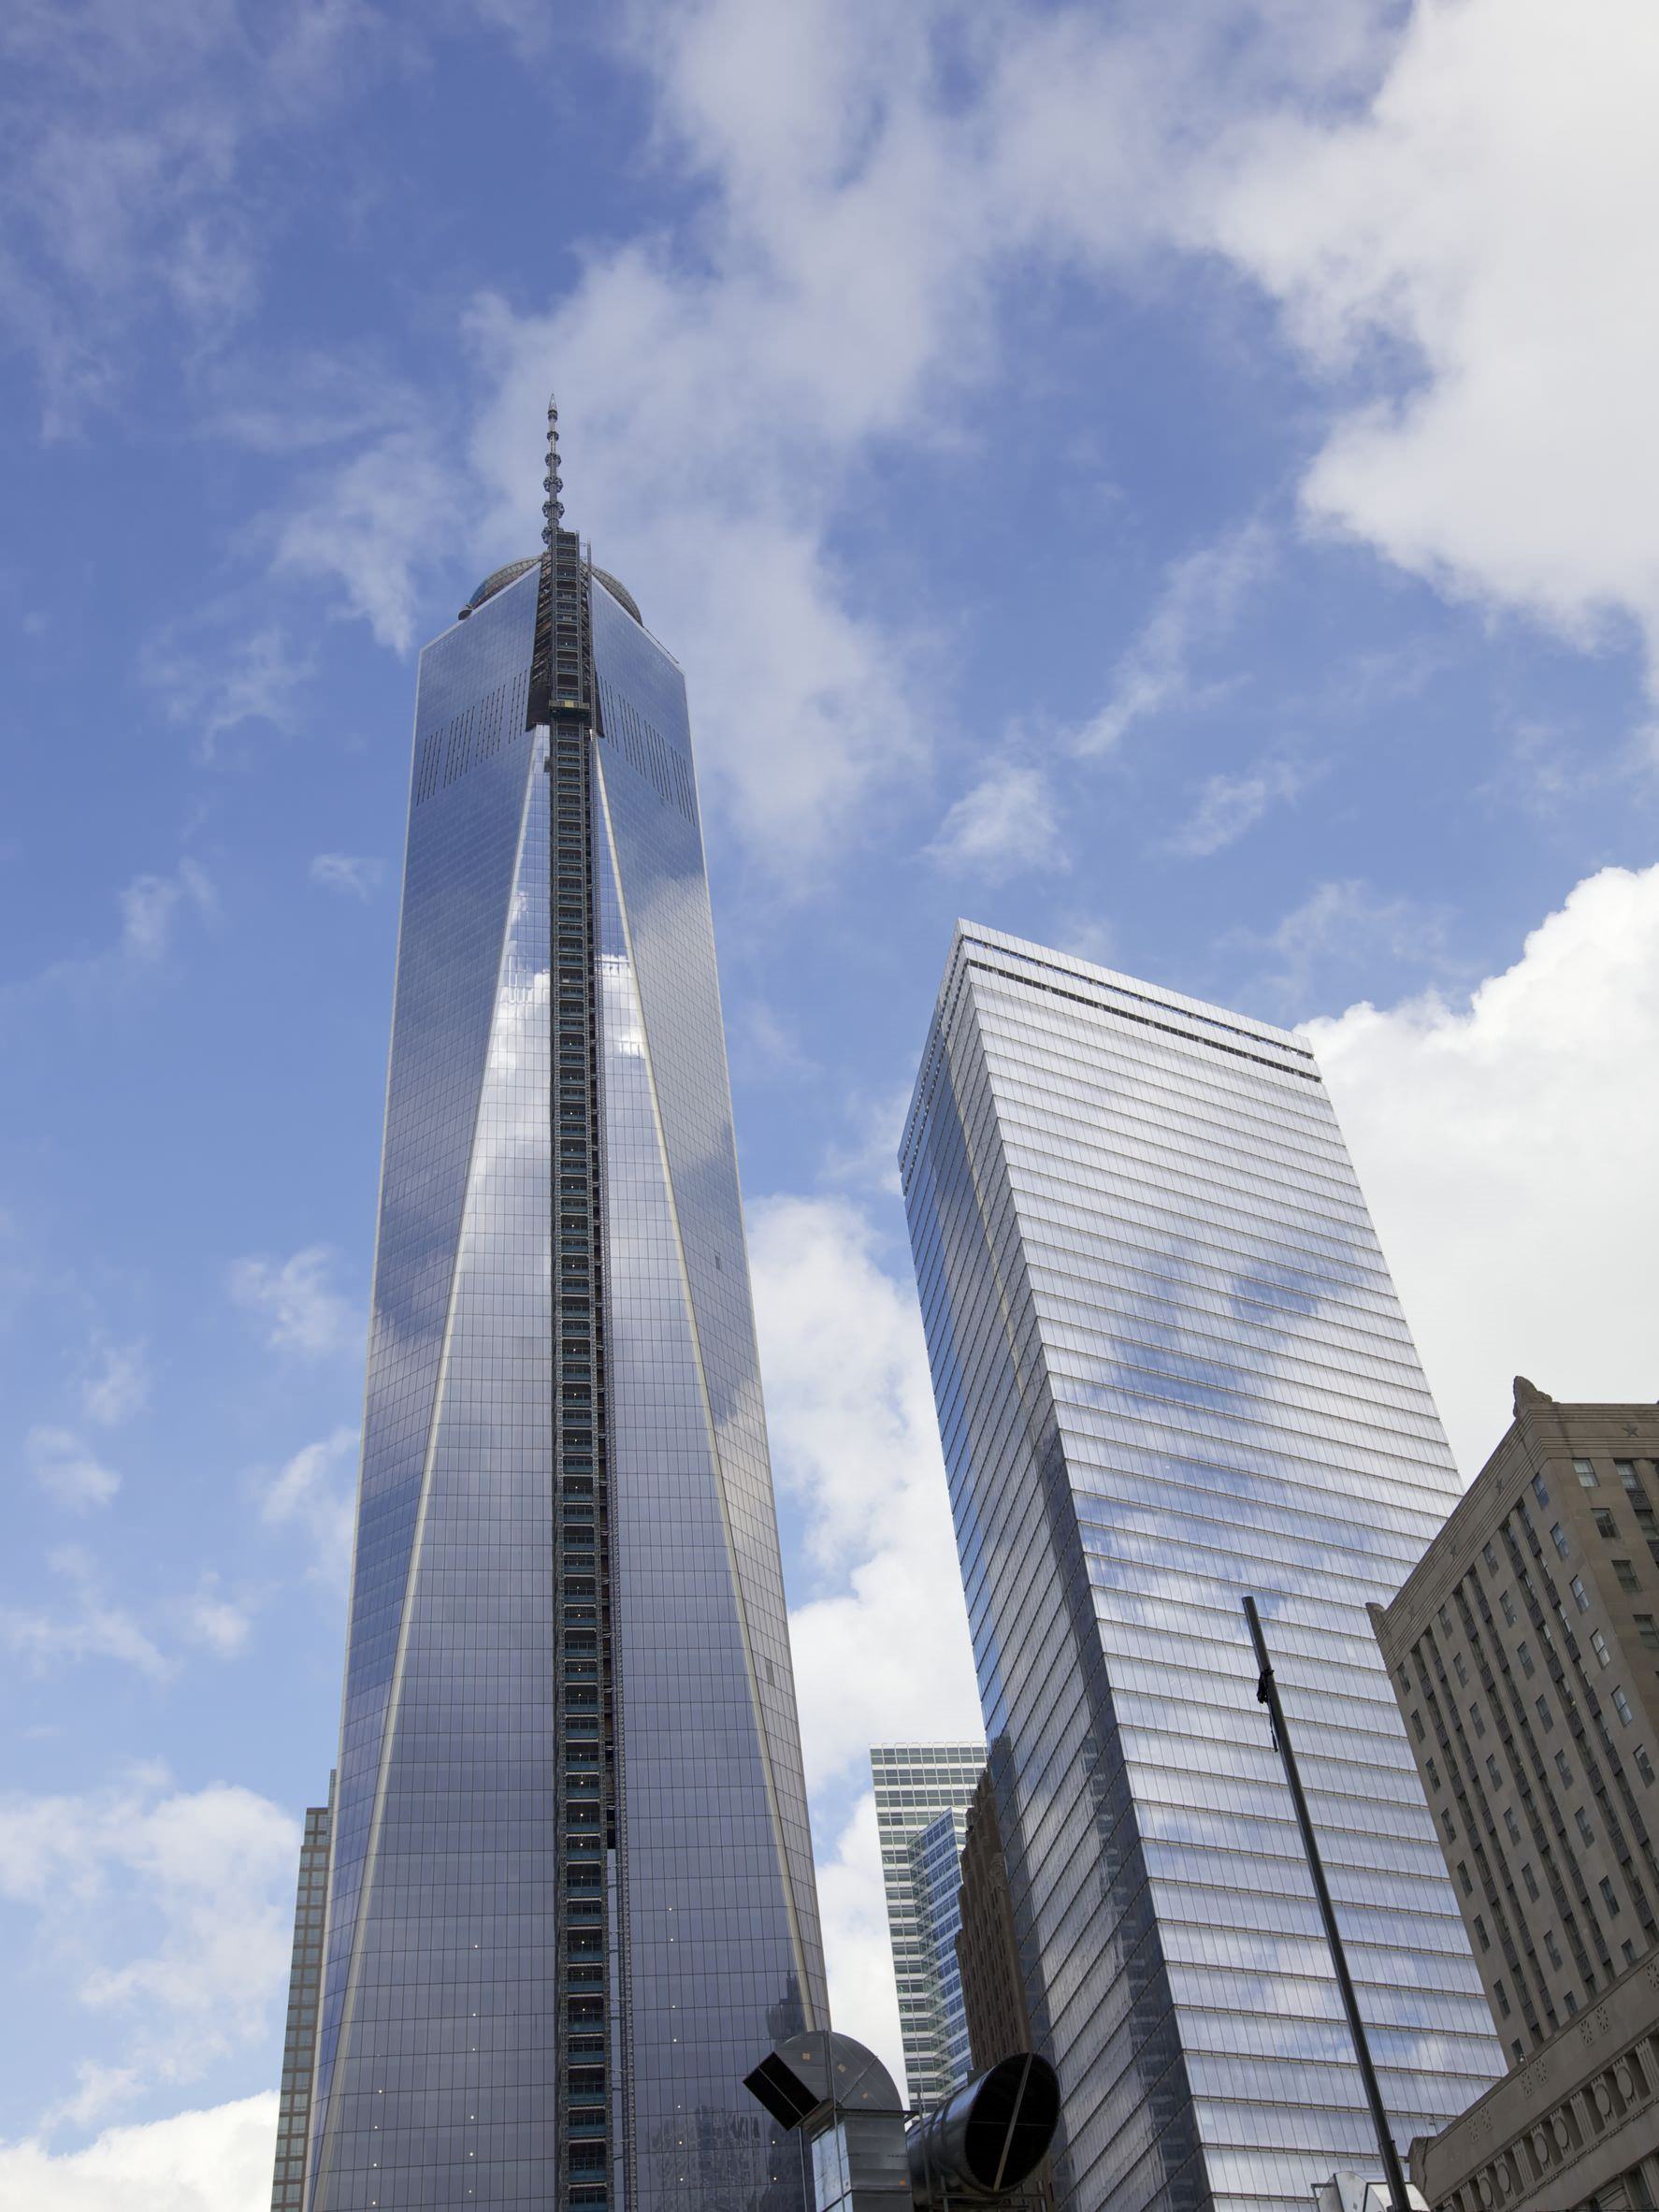 Conde Nast to Share 1 World Trade Center with U.S. Government